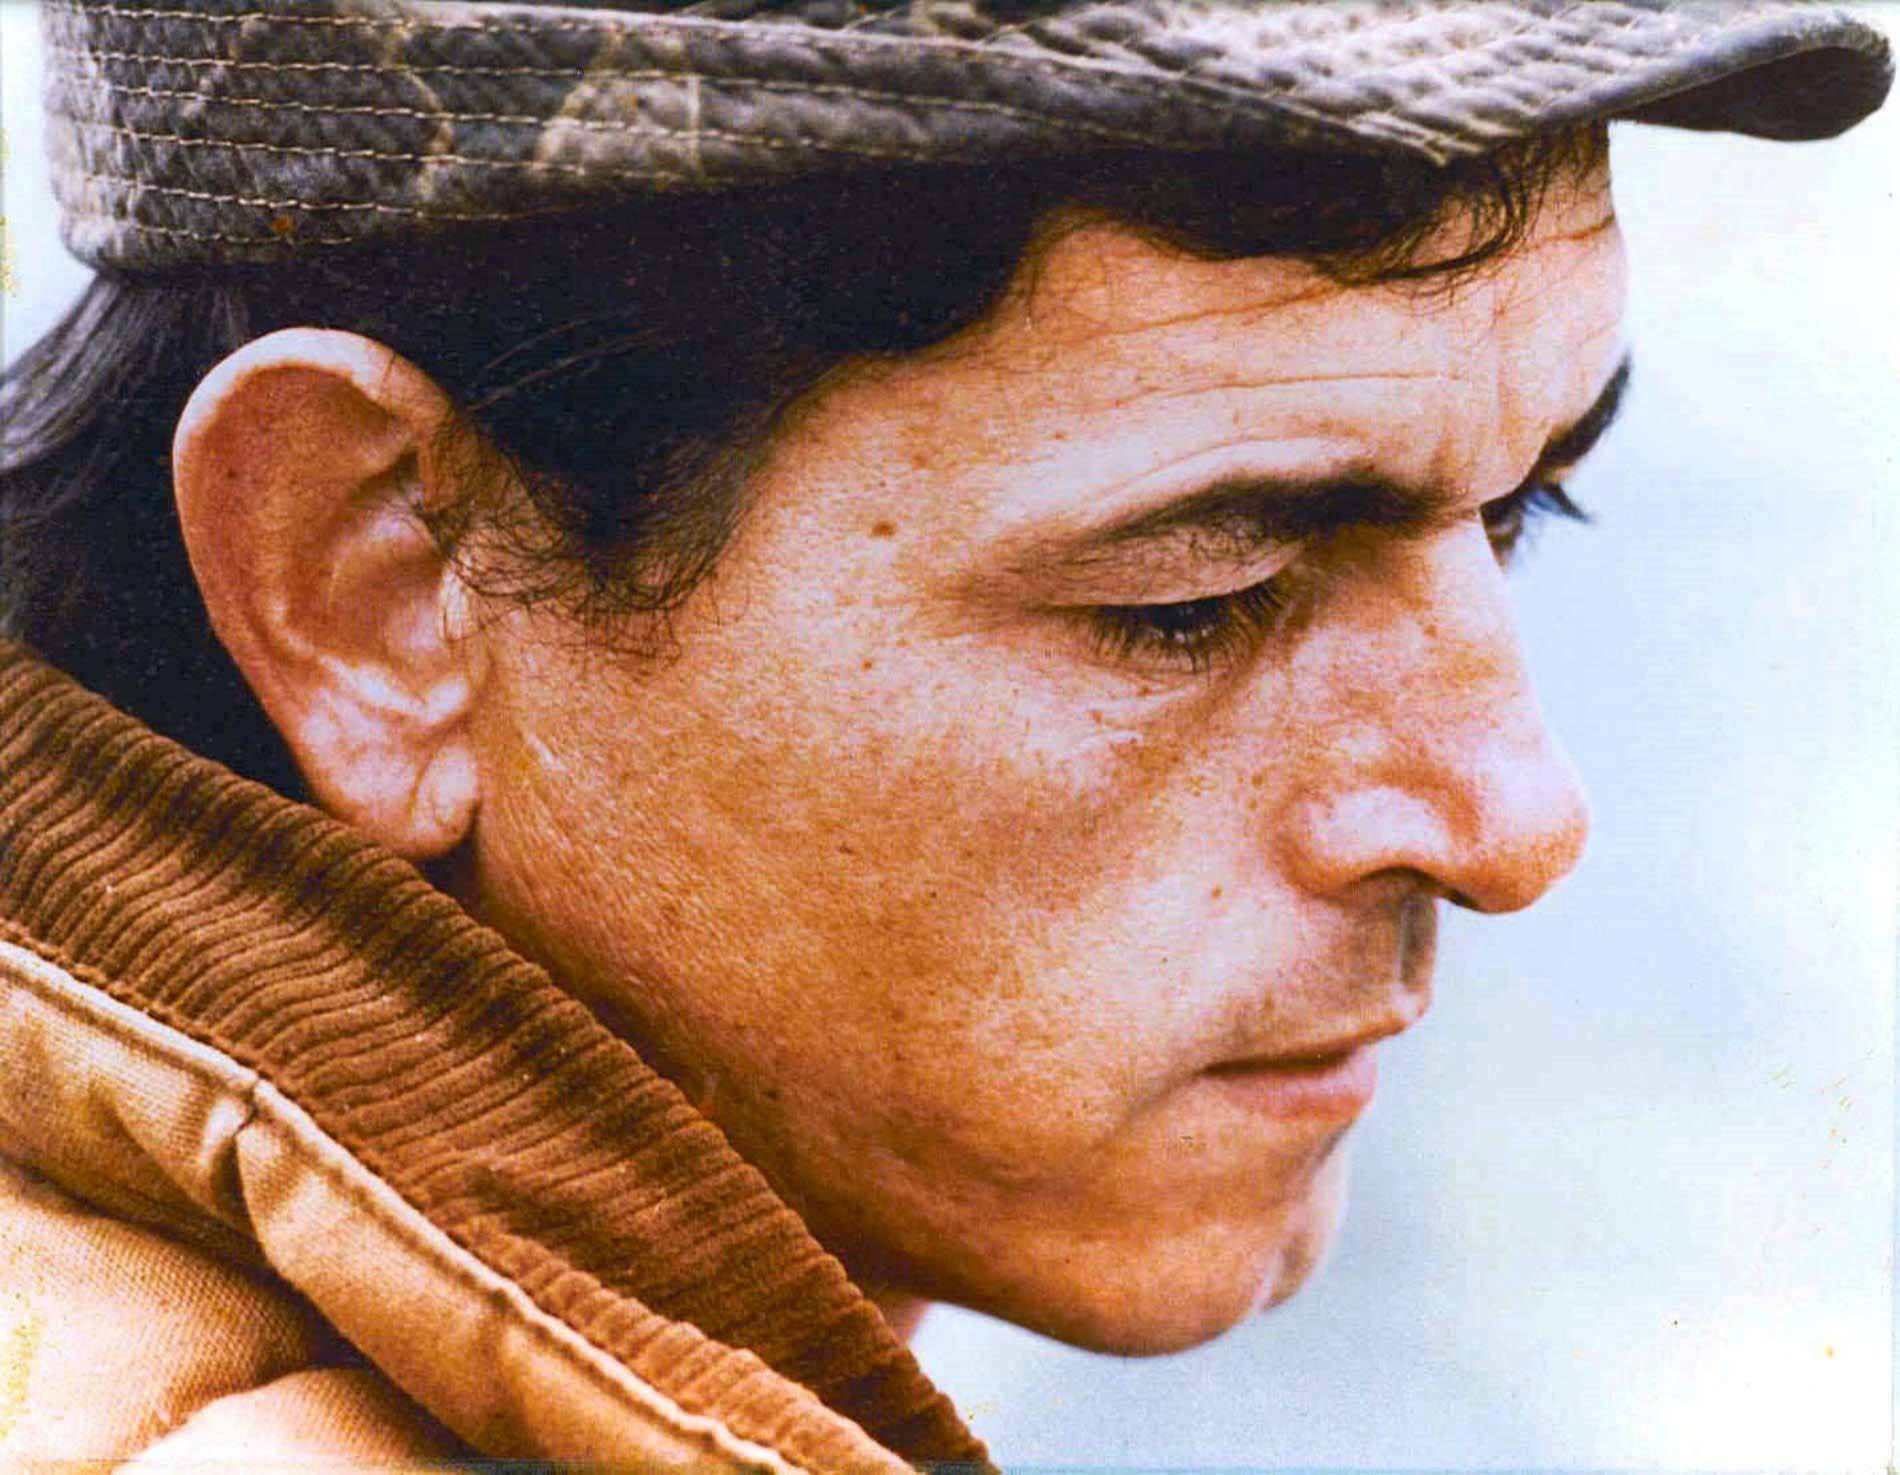 Author of "Alaska Challenge" Ralph Galeano as a younger man.